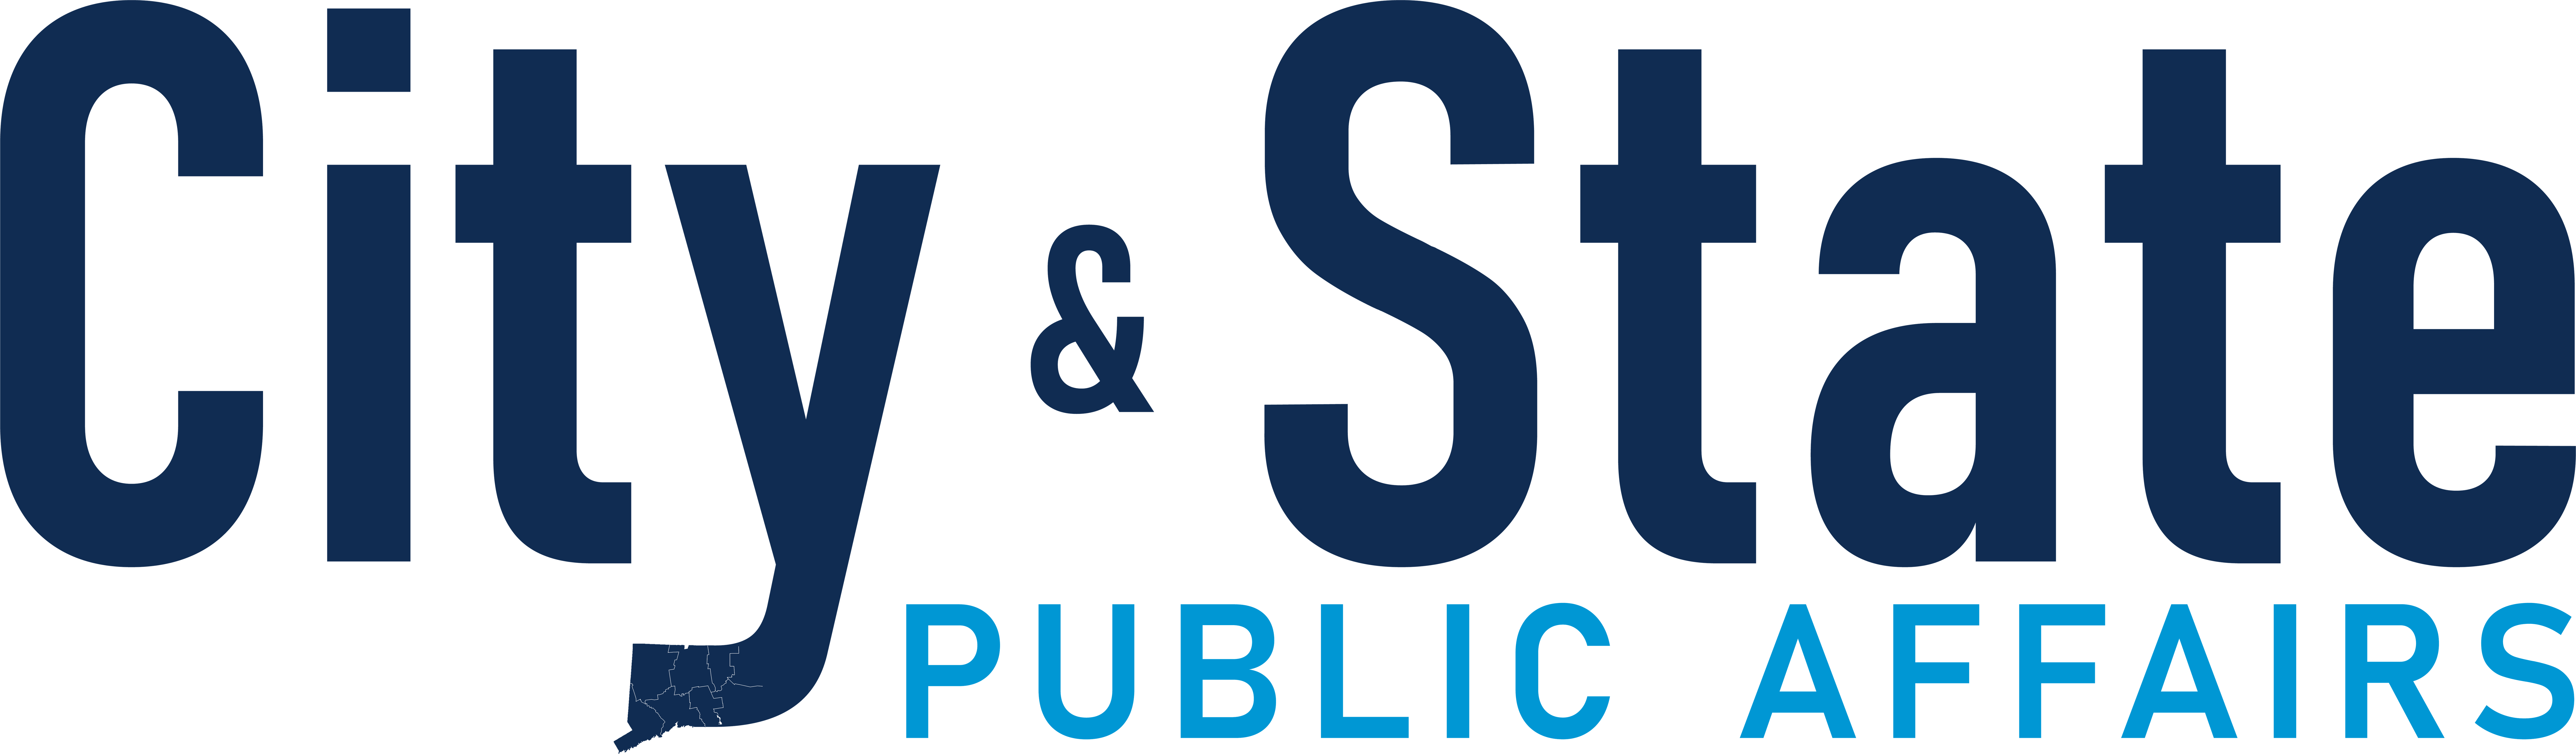 City and State Public Affairs